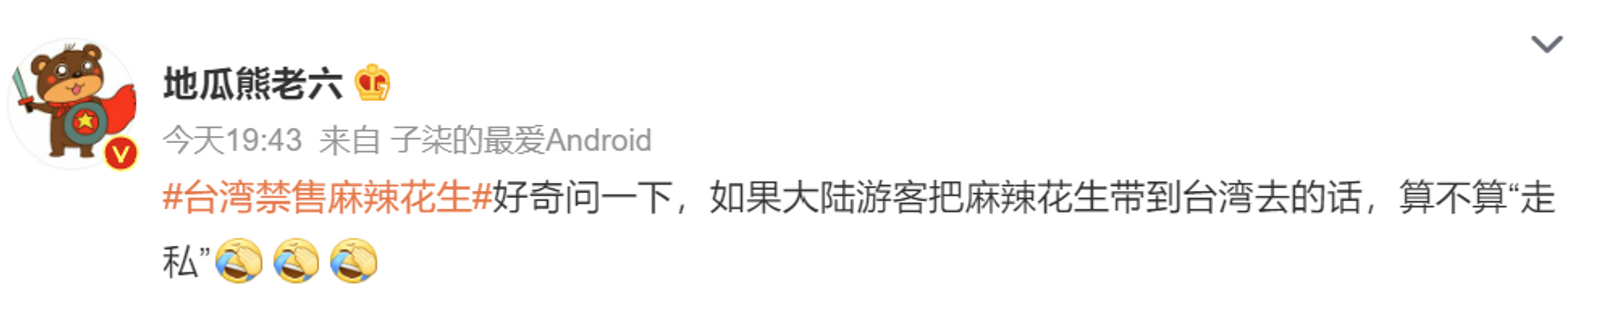 Weibo comment on peanut ban